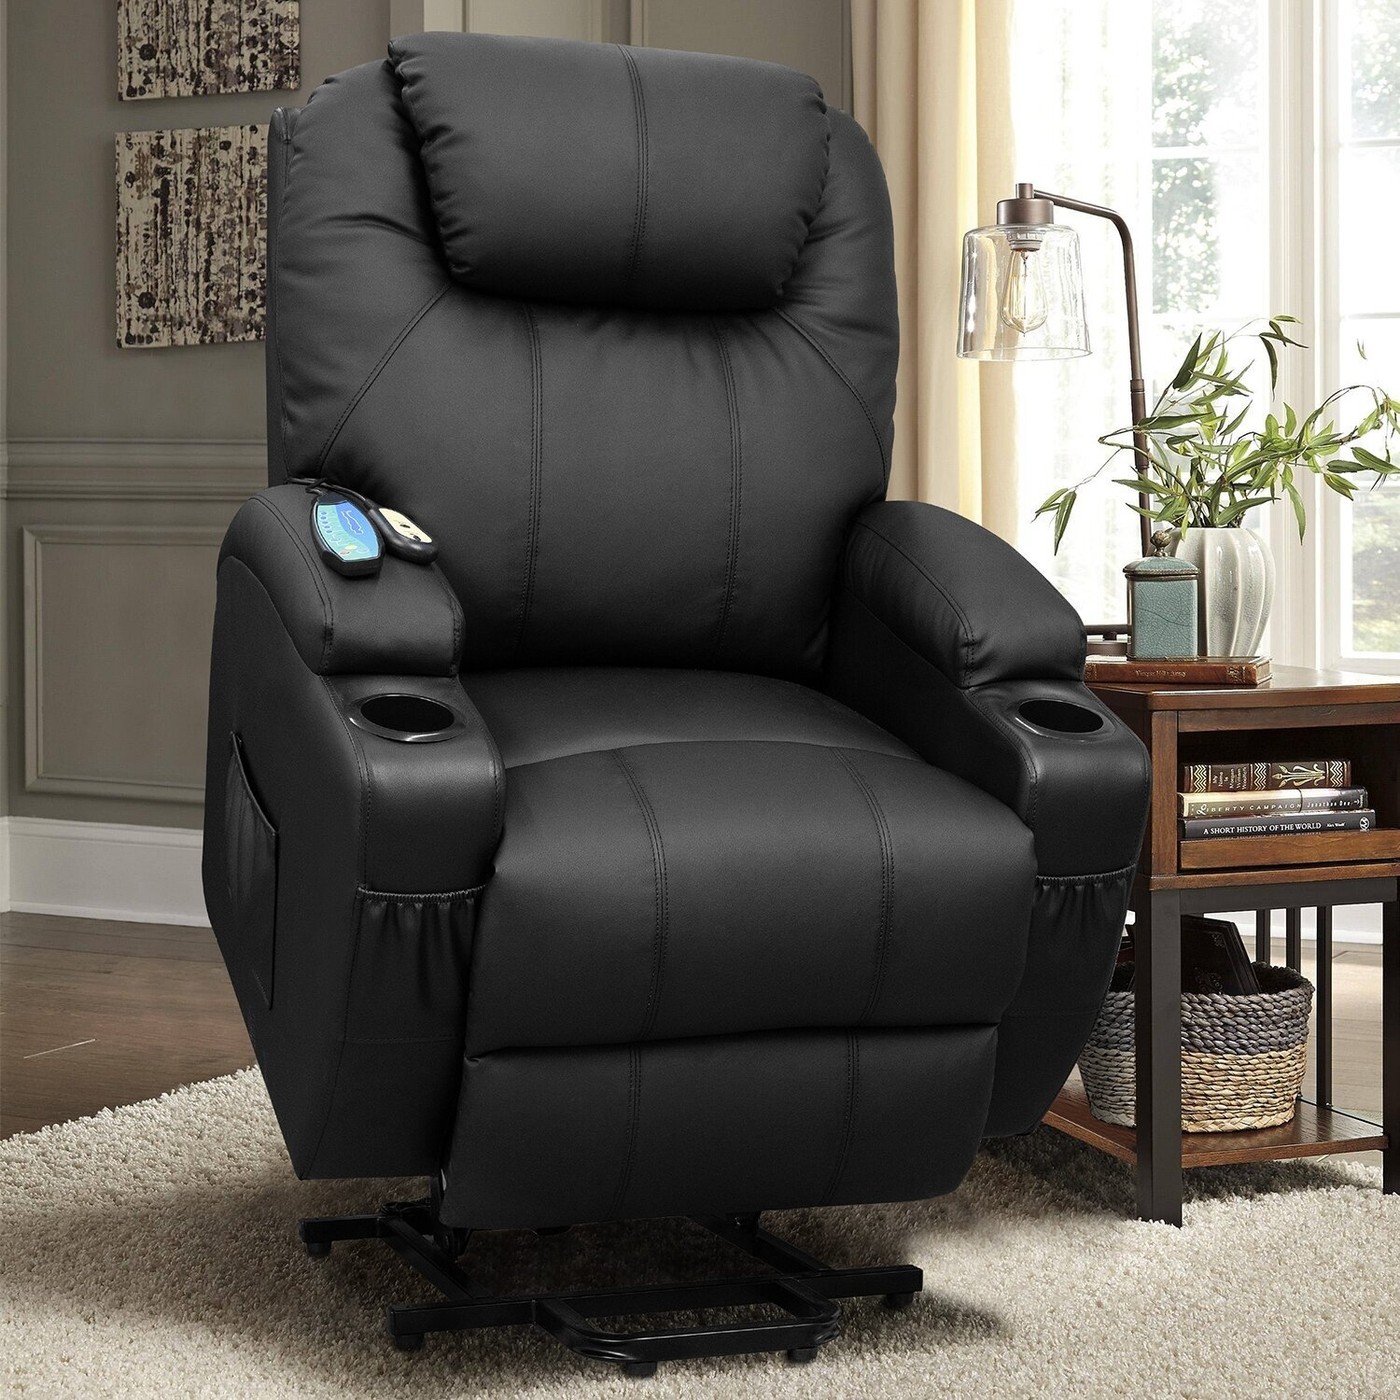 Best Orthopedic Chairs for Elderly: Top 10 Picks for Comfort and Support -  Far & Away